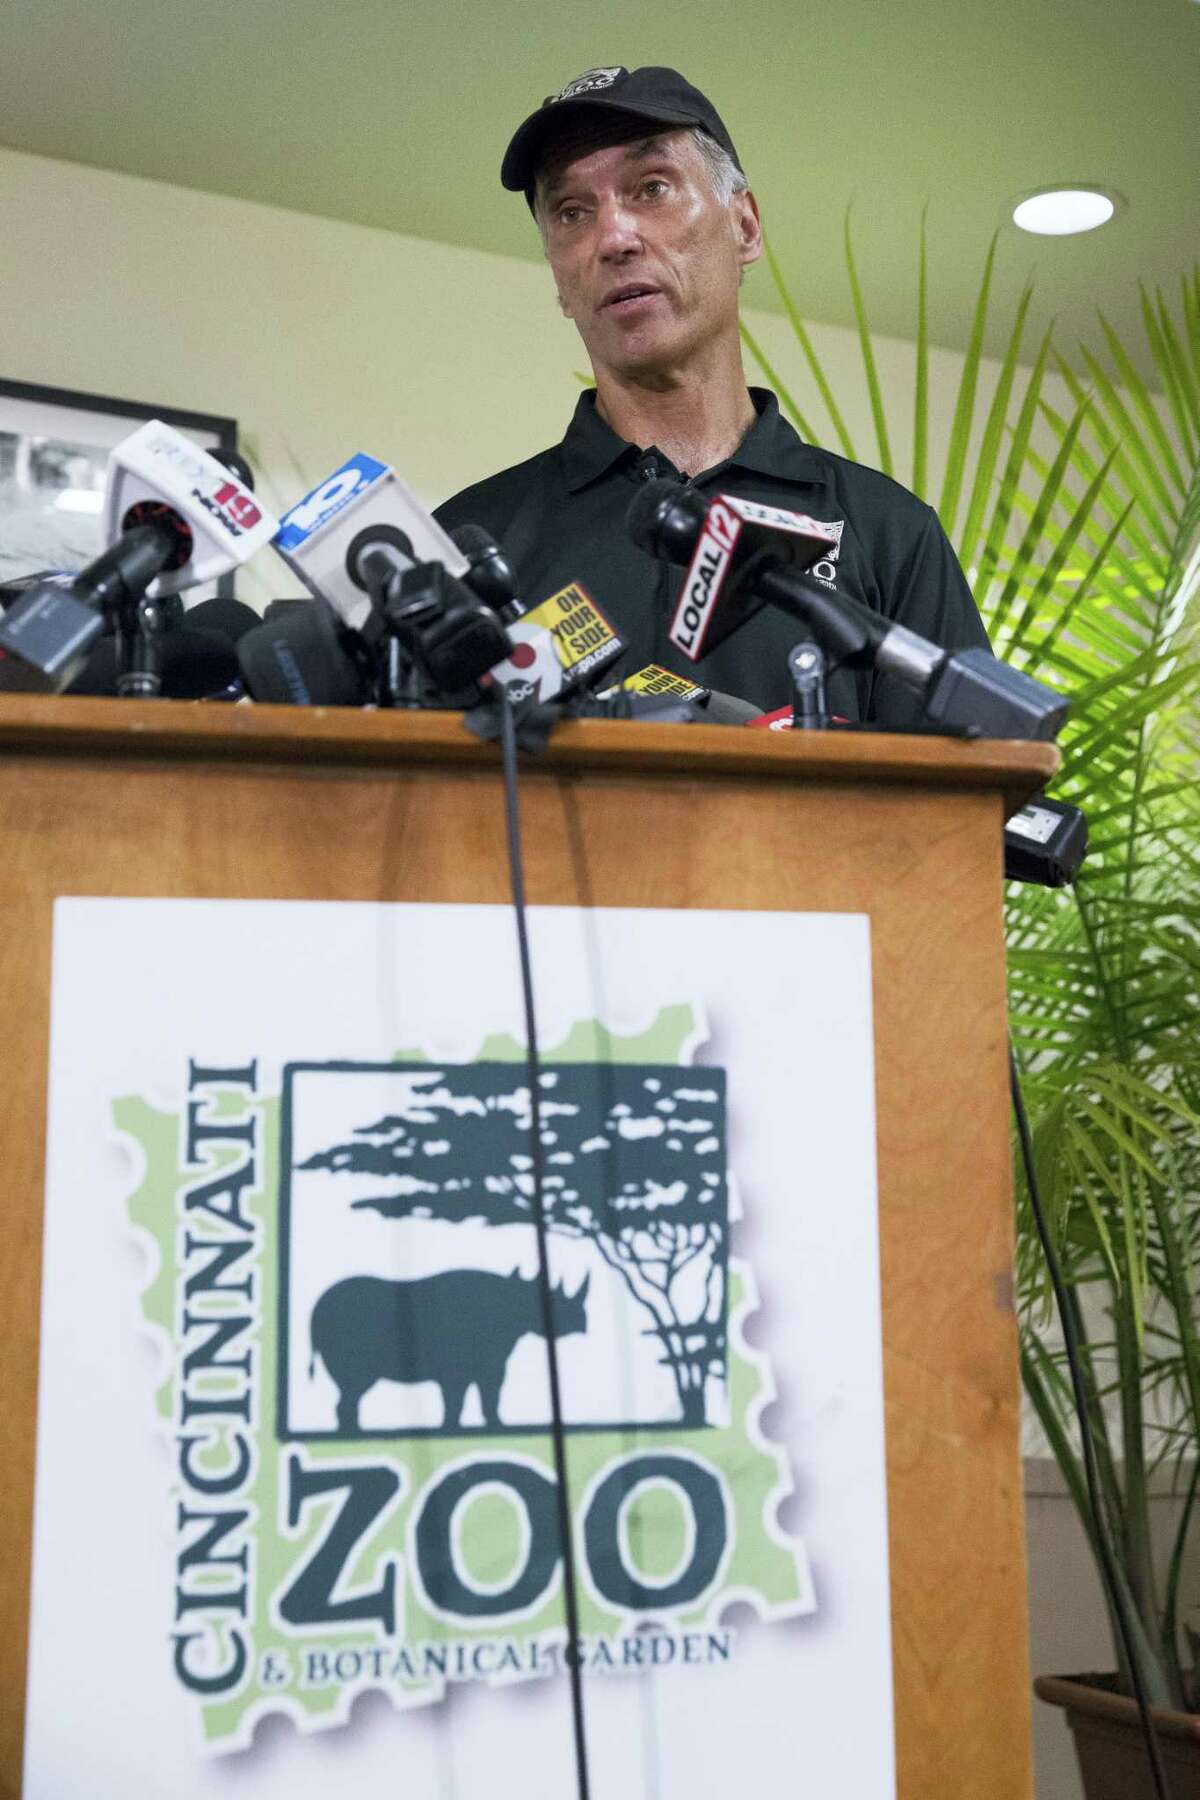 Thane Maynard, director of the Cincinnati Zoo & Botanical Garden, speaks during a news conference, Monday, May 30, 2016, in Cincinnati. A gorilla named Harambe was killed by a special zoo response team on Saturday after a 4-year-old boy slipped into an exhibit and it was concluded his life was in danger.